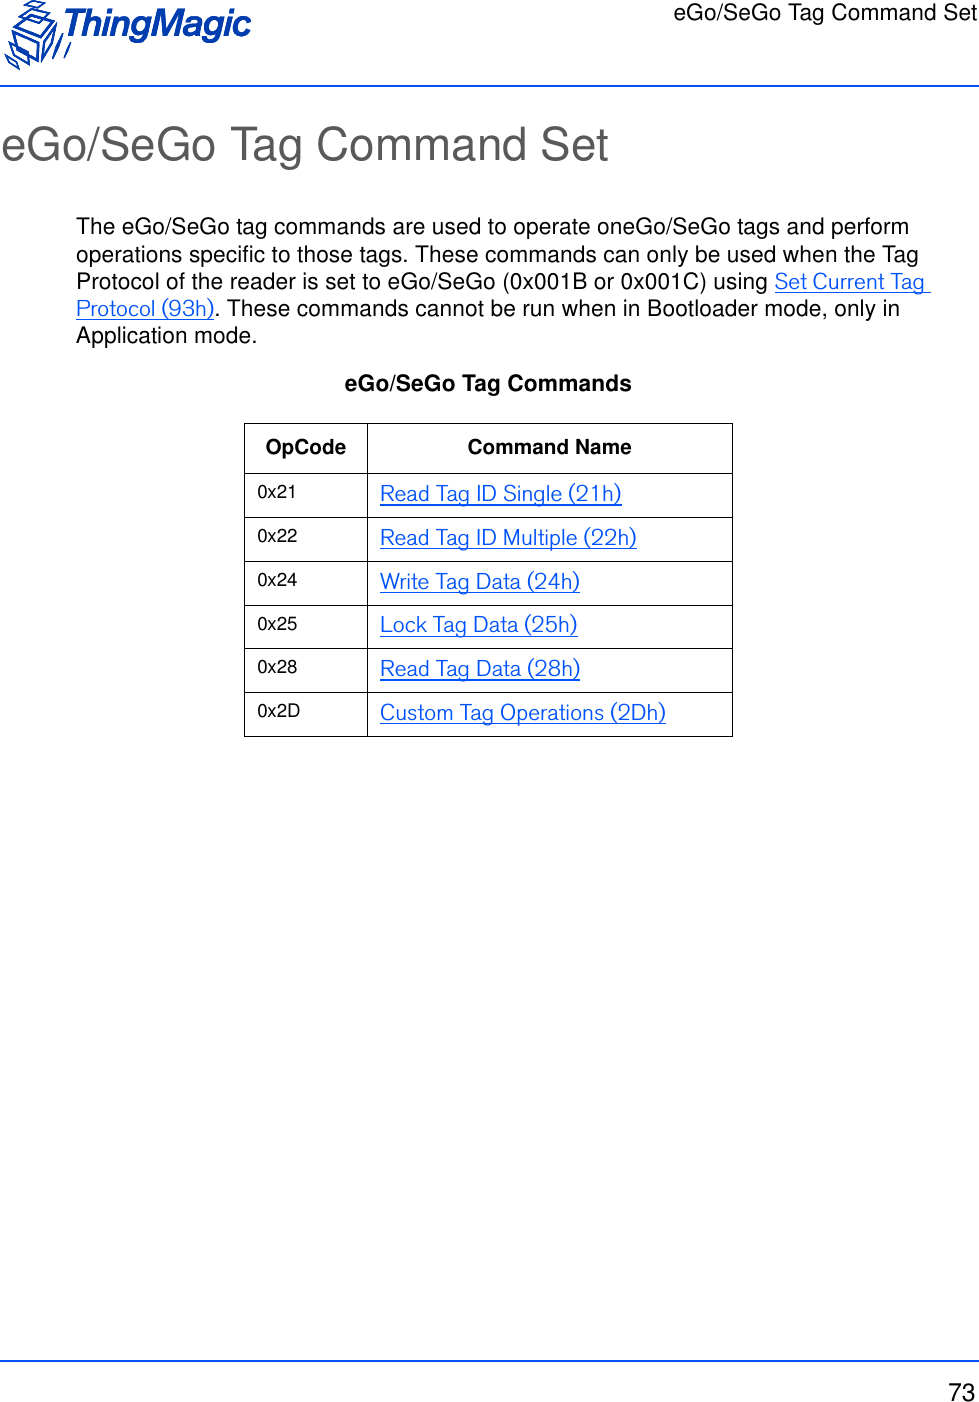 eGo/SeGo Tag Command Set73eGo/SeGo Tag Command SetThe eGo/SeGo tag commands are used to operate oneGo/SeGo tags and perform operations specific to those tags. These commands can only be used when the Tag Protocol of the reader is set to eGo/SeGo (0x001B or 0x001C) using Set Current Tag Protocol (93h). These commands cannot be run when in Bootloader mode, only in Application mode. eGo/SeGo Tag Commands OpCode Command Name0x21 Read Tag ID Single (21h)0x22 Read Tag ID Multiple (22h)0x24 Write Tag Data (24h)0x25 Lock Tag Data (25h)0x28 Read Tag Data (28h)0x2D Custom Tag Operations (2Dh)